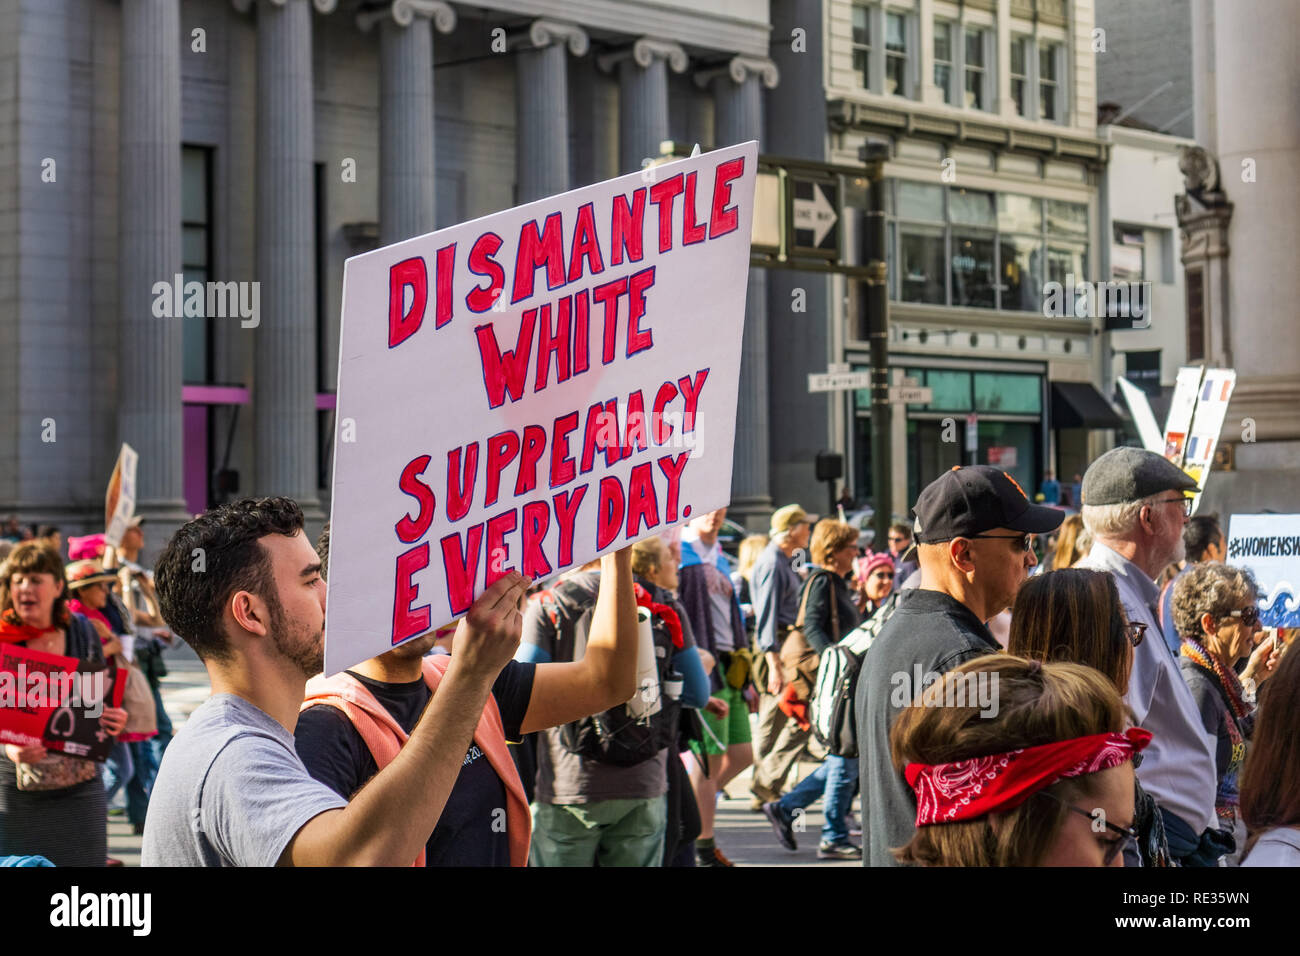 San Francisco, USA. 19th Jan 2019.  Participant to the Women's March event holds 'Dismantle white supremacy everyday' sign while marching on Market street in downtown San Francisco Stock Photo